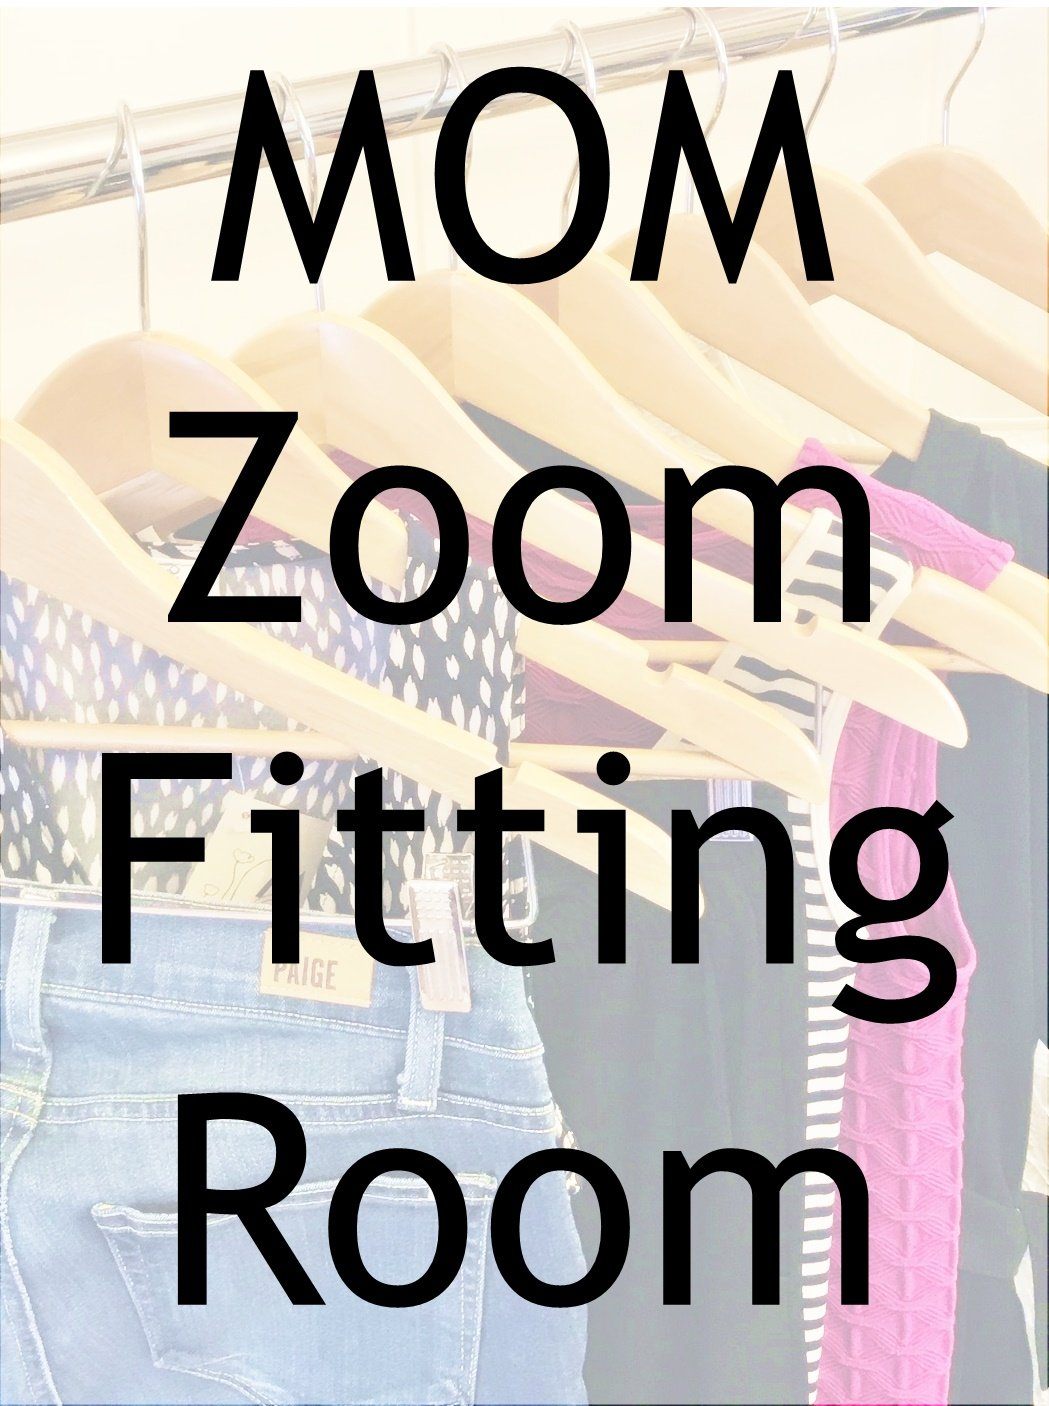 Zoom Fitting Room (admit it, you're curious) Accessories Mom's the Word 